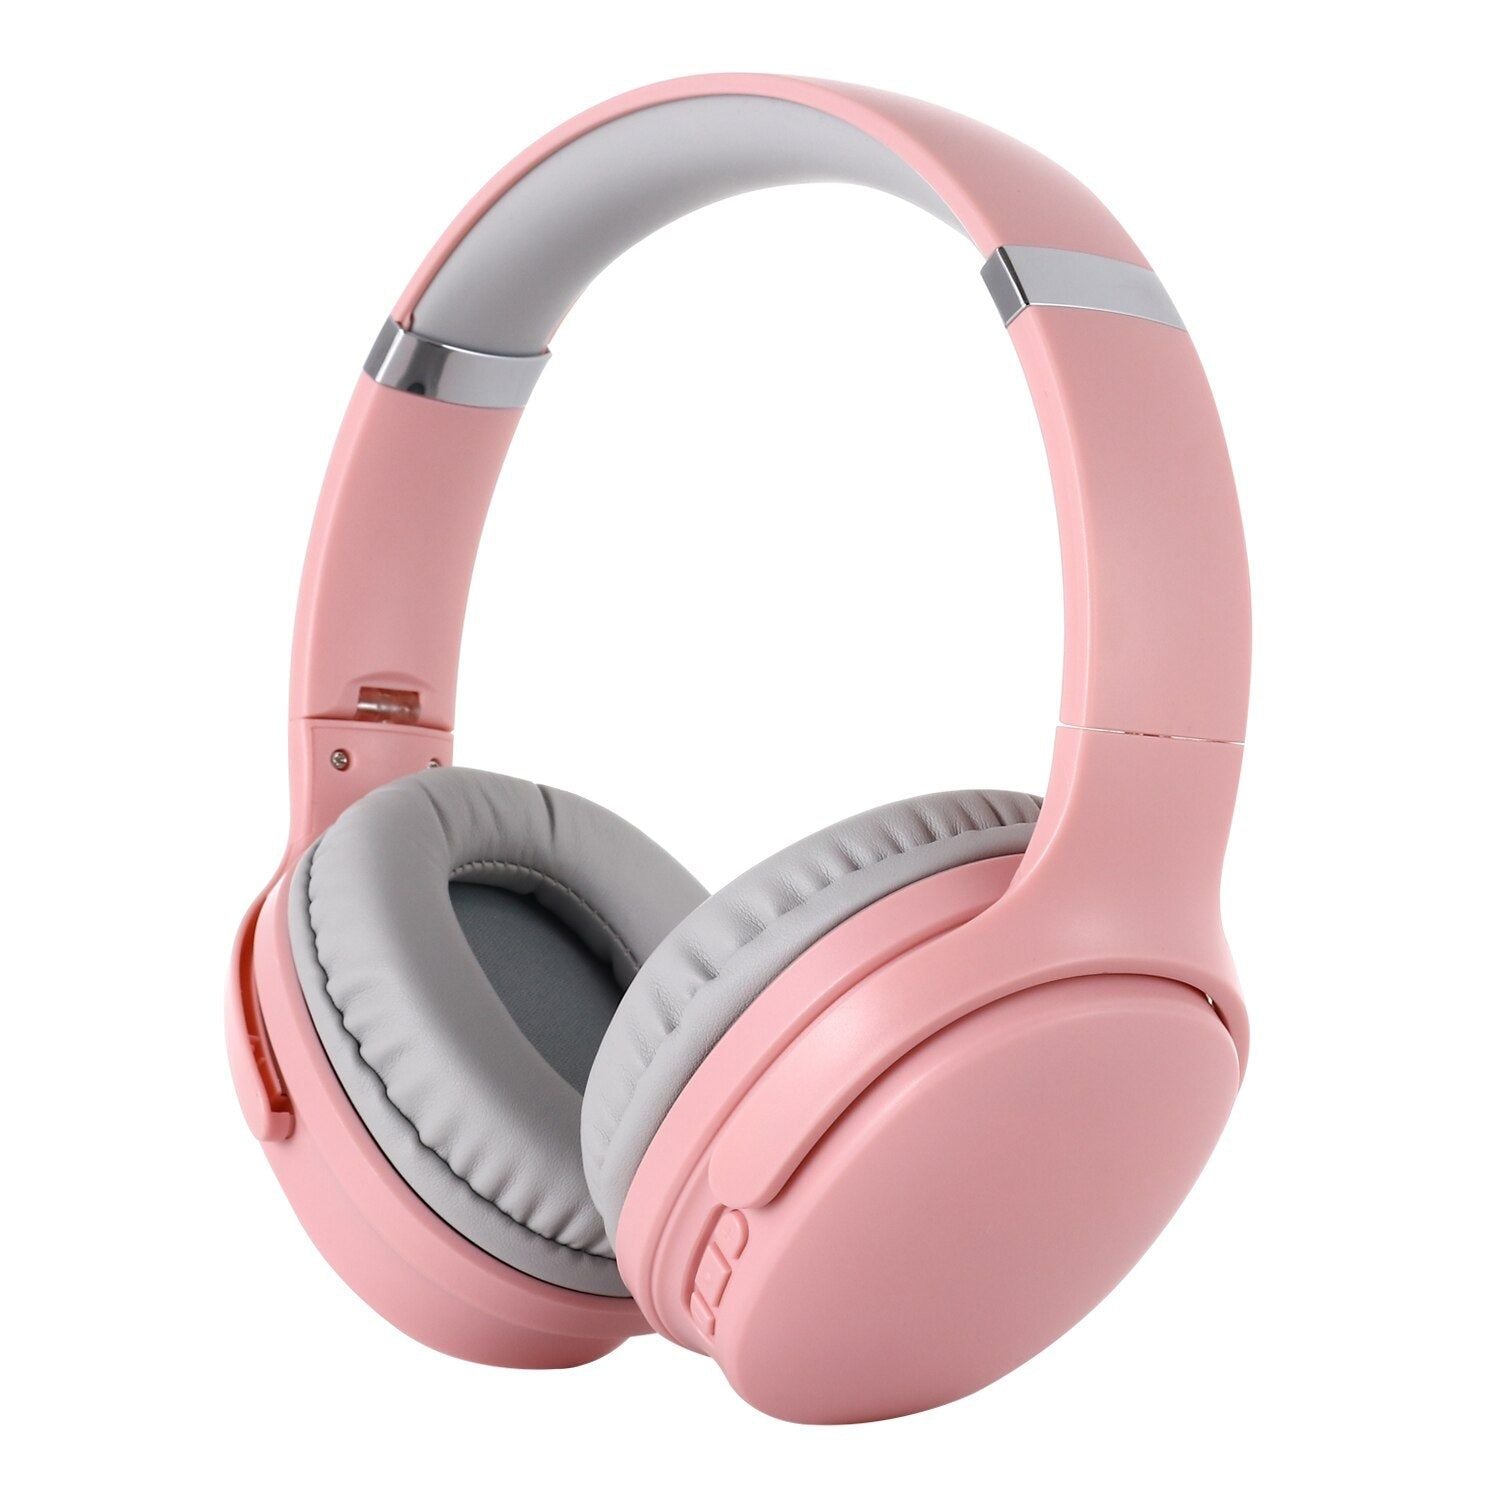 MH-13 Wireless 2-in-1 Speaker Function Headphone with Microphone and Radio Pink | Hifi Media Store